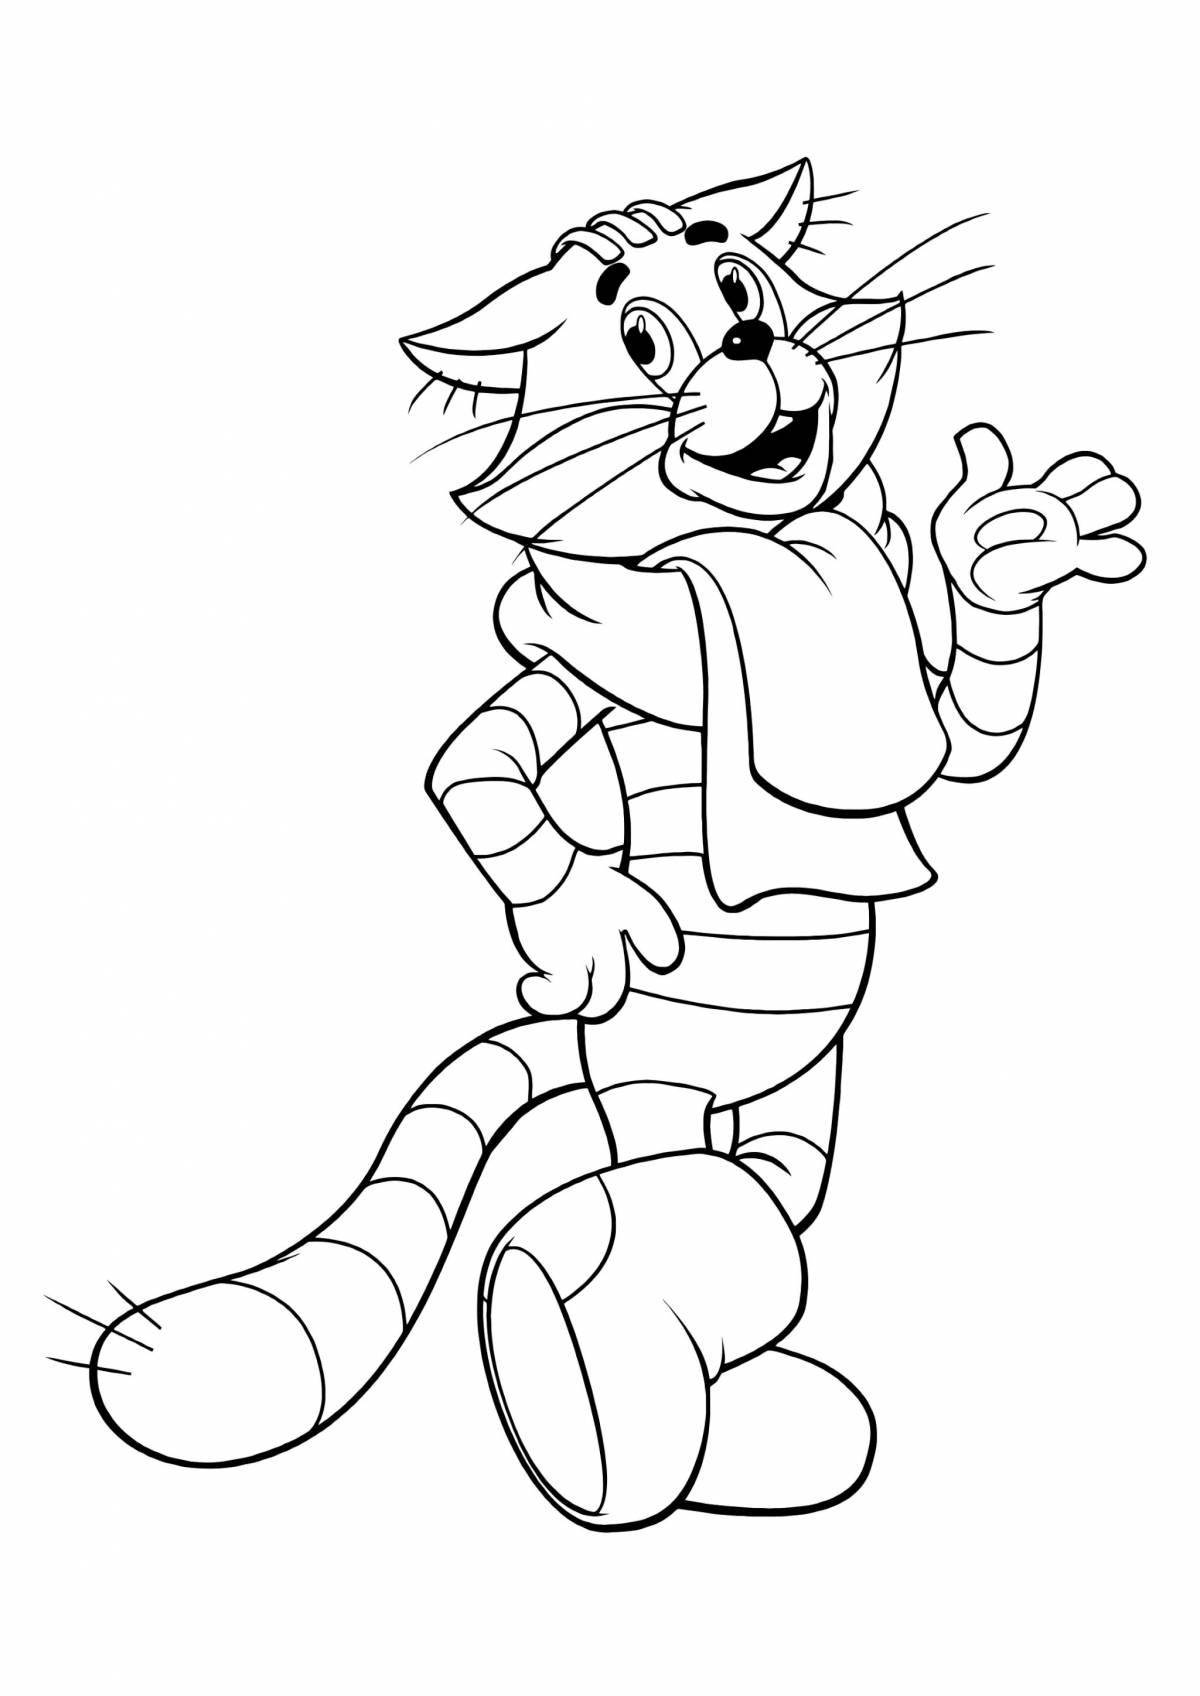 Coloring page charming uncle fedor dog and cat